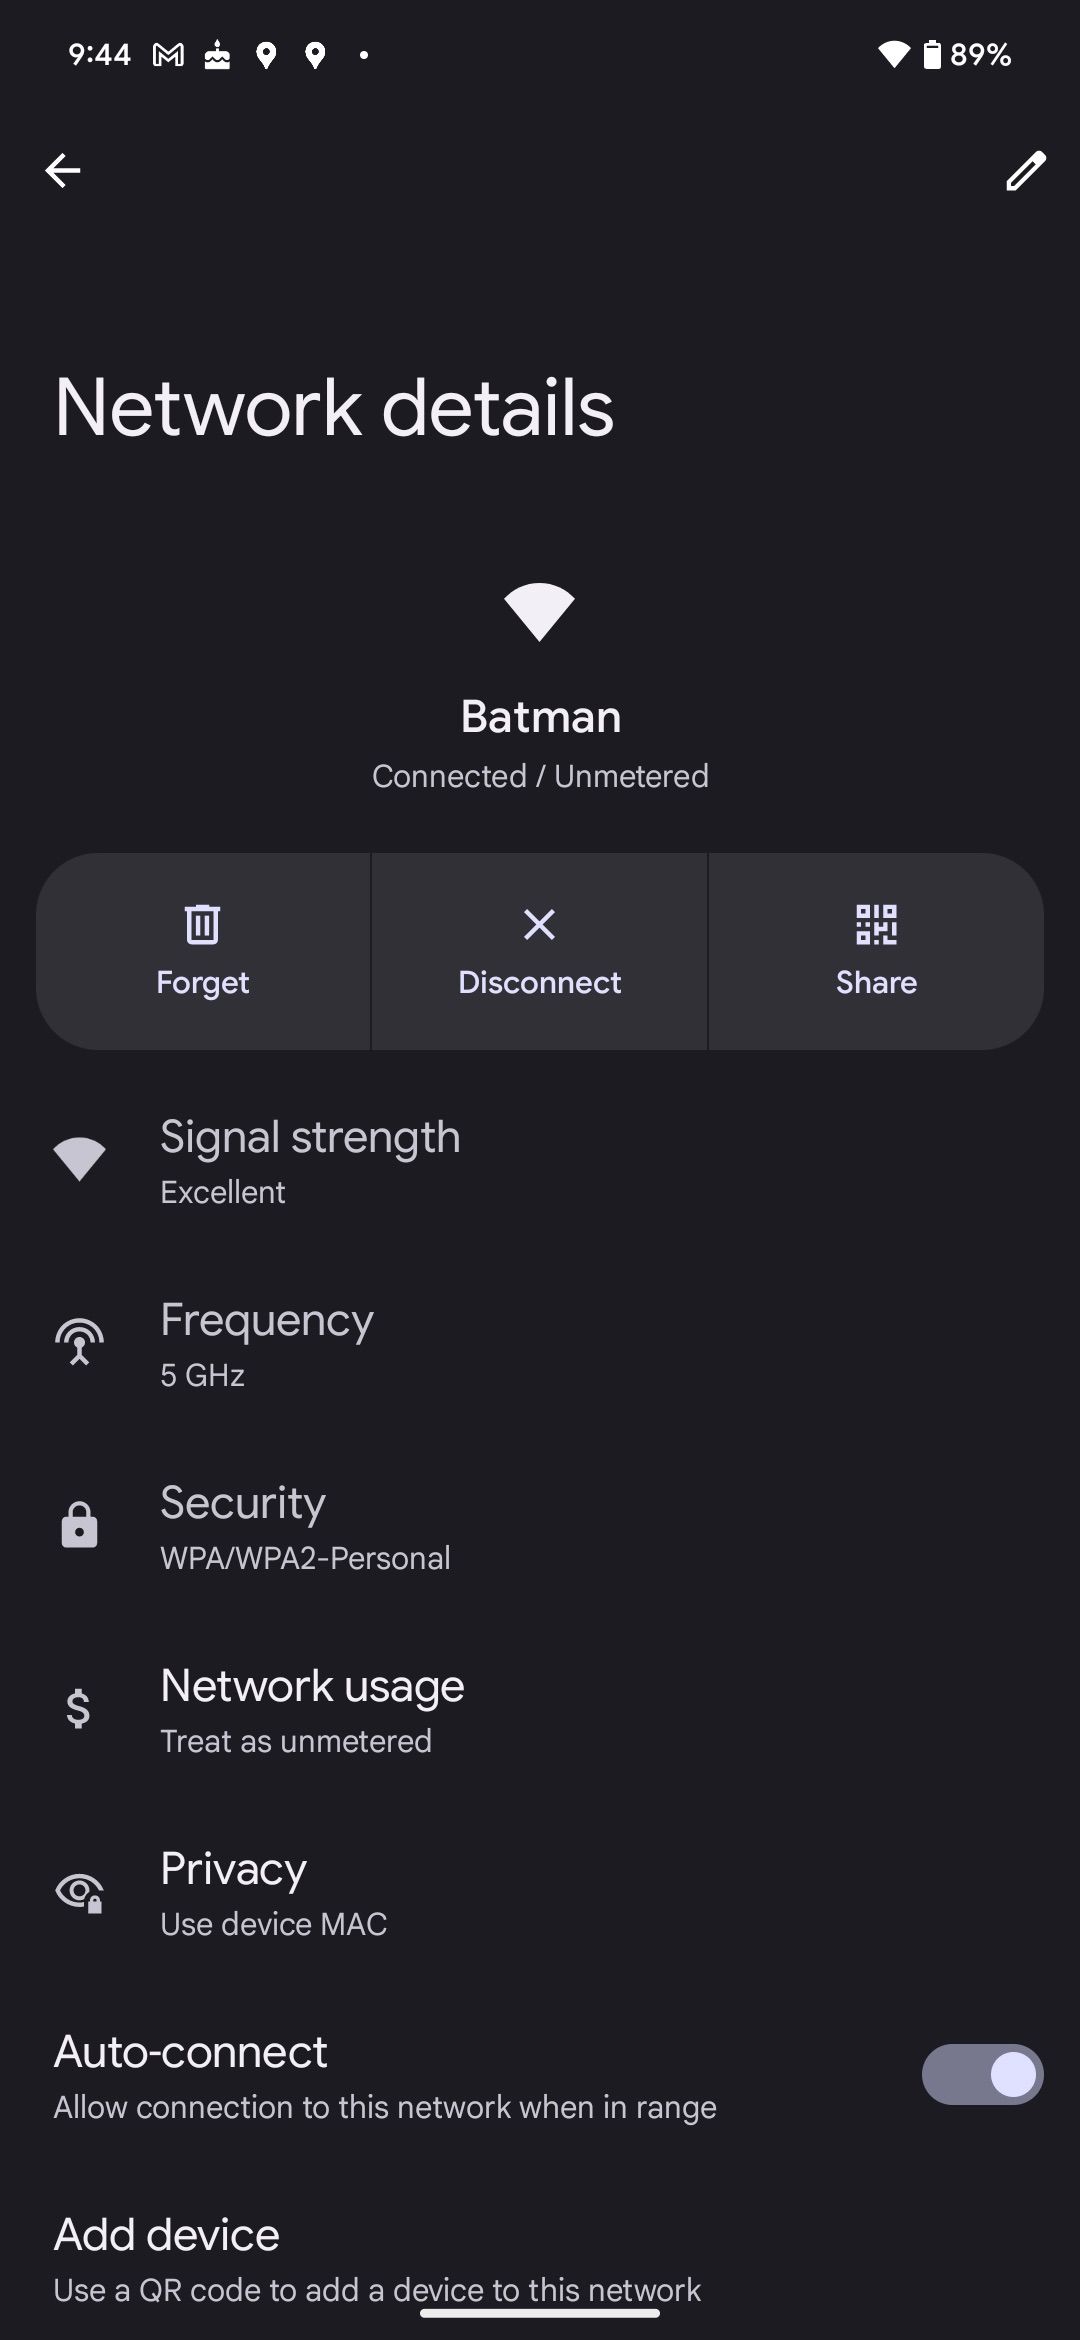 Wi-Fi network details displayed on a Google Pixel phone